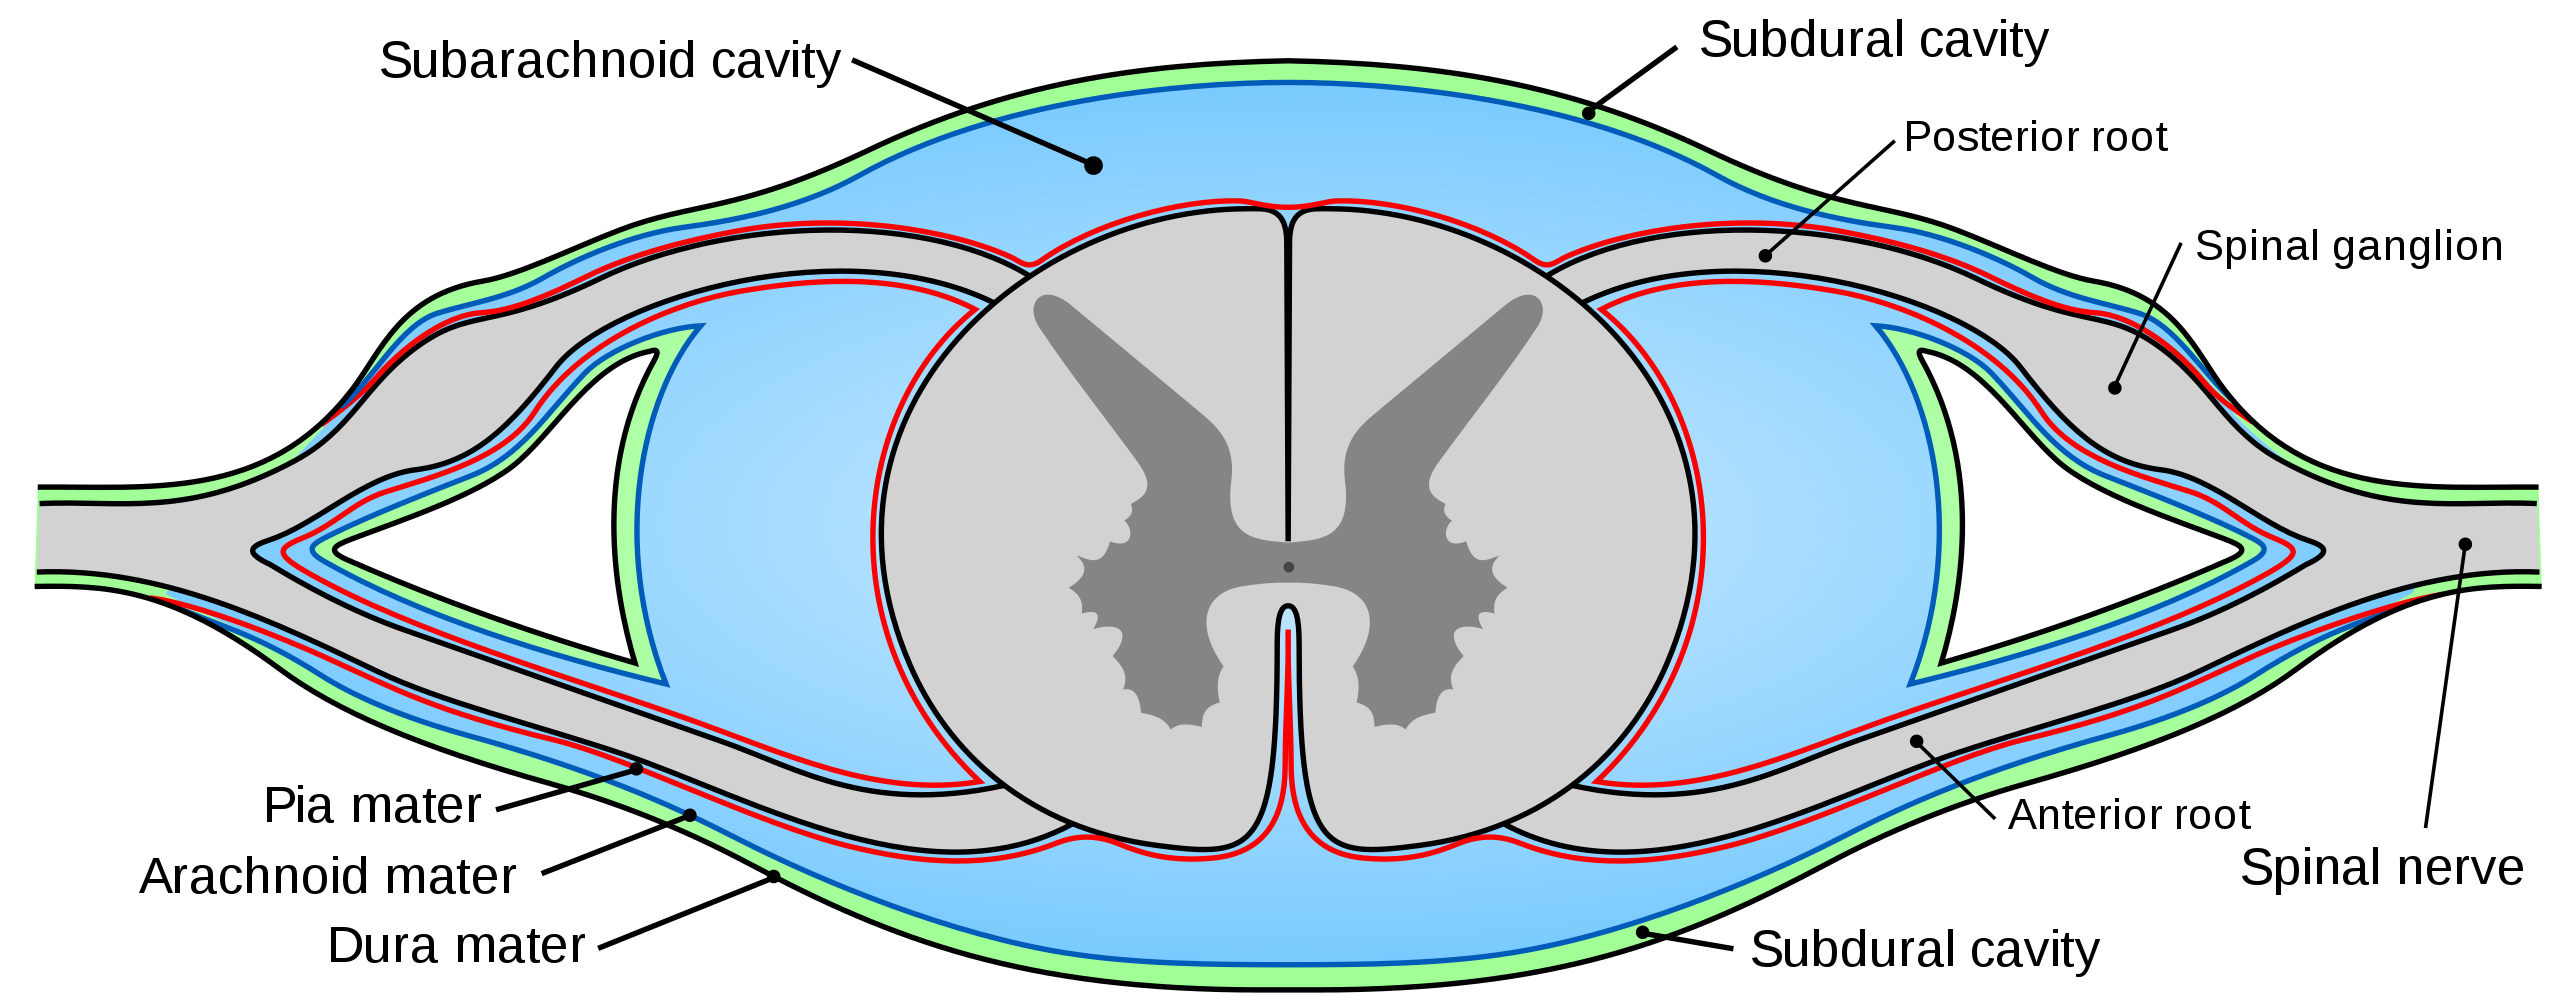 Drawing of a spinal cord segment with meninges and other structures labeled; all structures are listed in the text